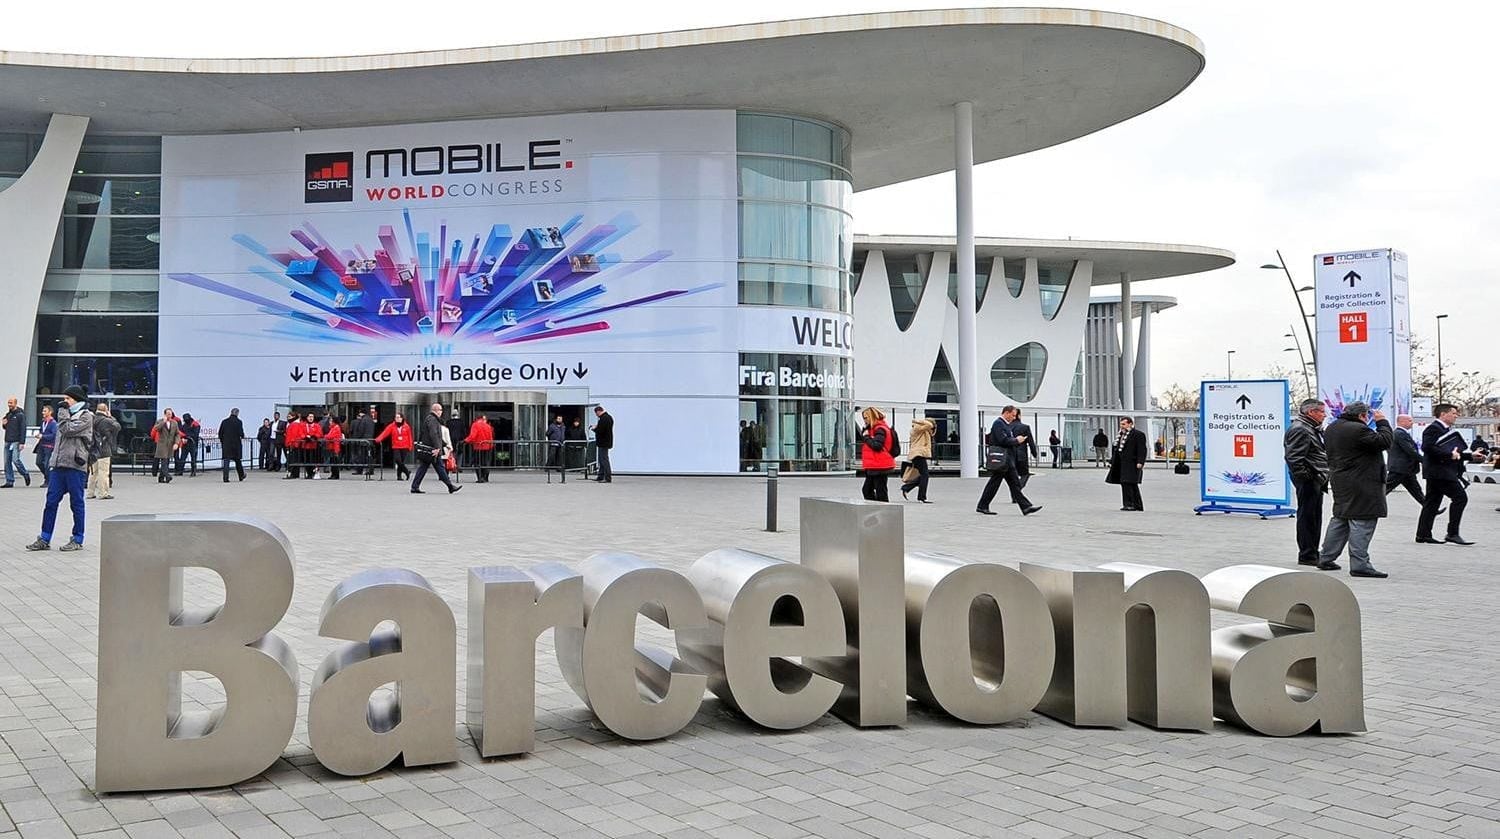 Mobile World Congress 2018: Everything That’ll Shape Up the Mobile World in the Year Ahead and Beyond